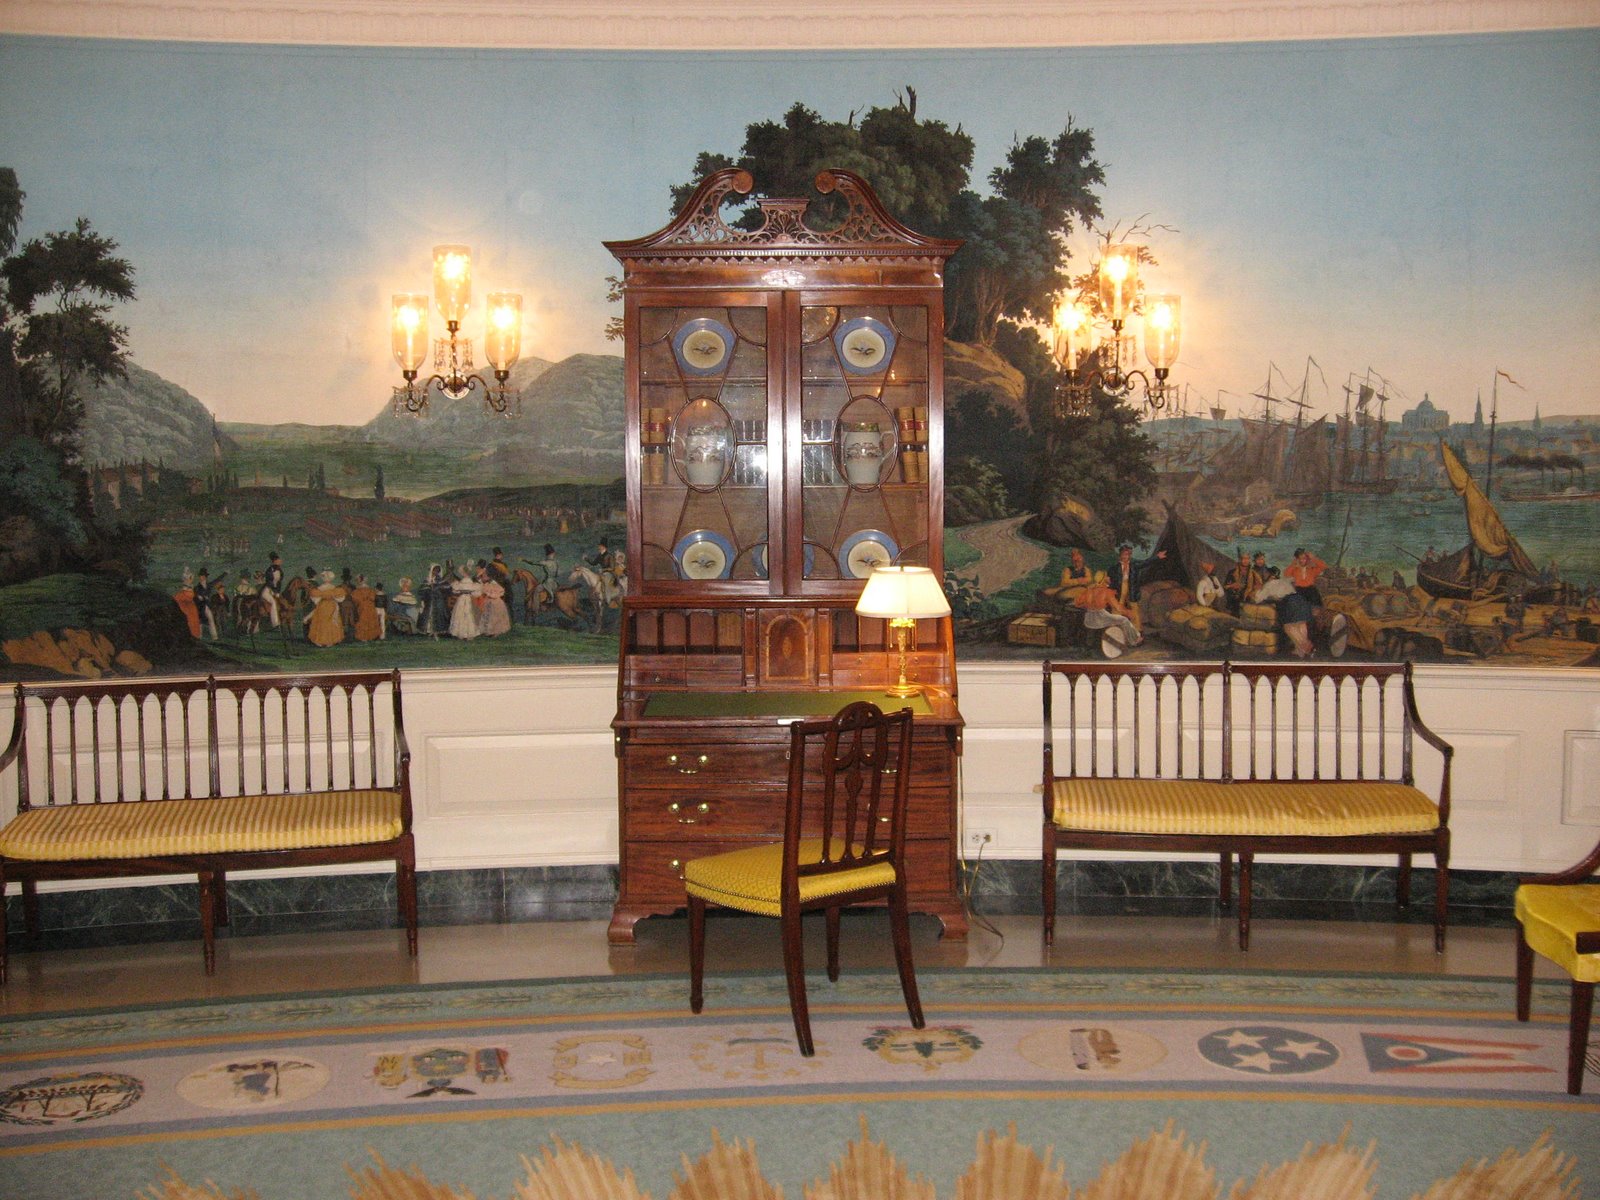 Showing The Panoramic Zuber Et Cie Wallpaper Scenes Of North America